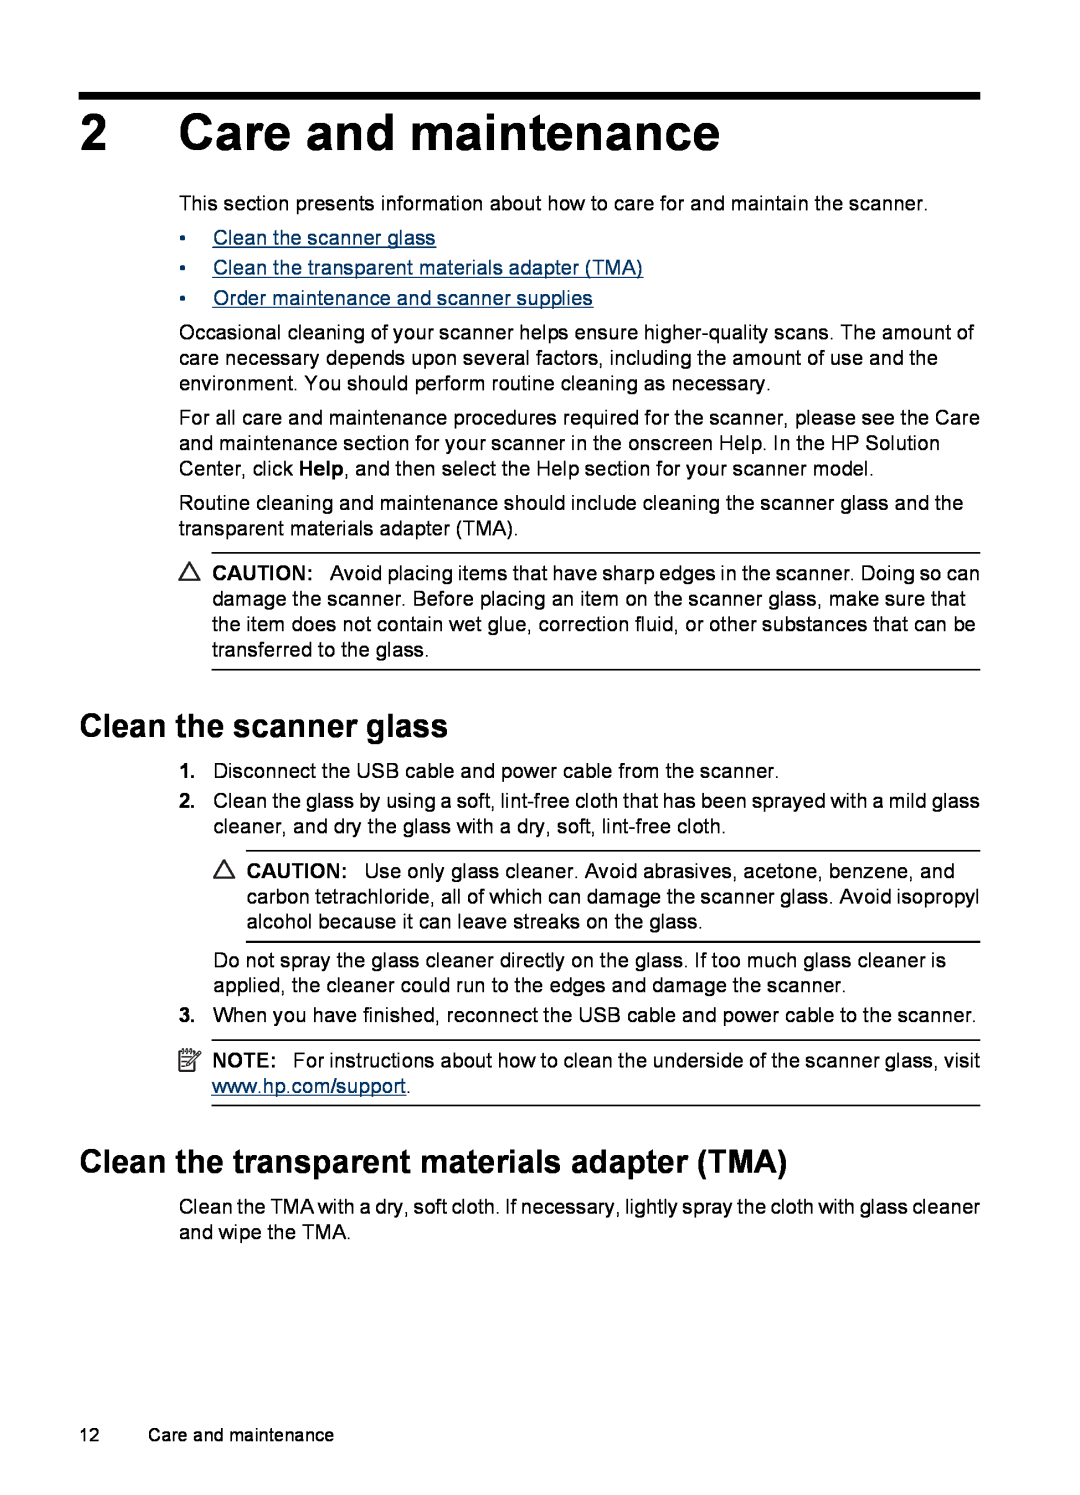 HP G3110 L2698A manual Care and maintenance, Clean the scanner glass, Clean the transparent materials adapter TMA 